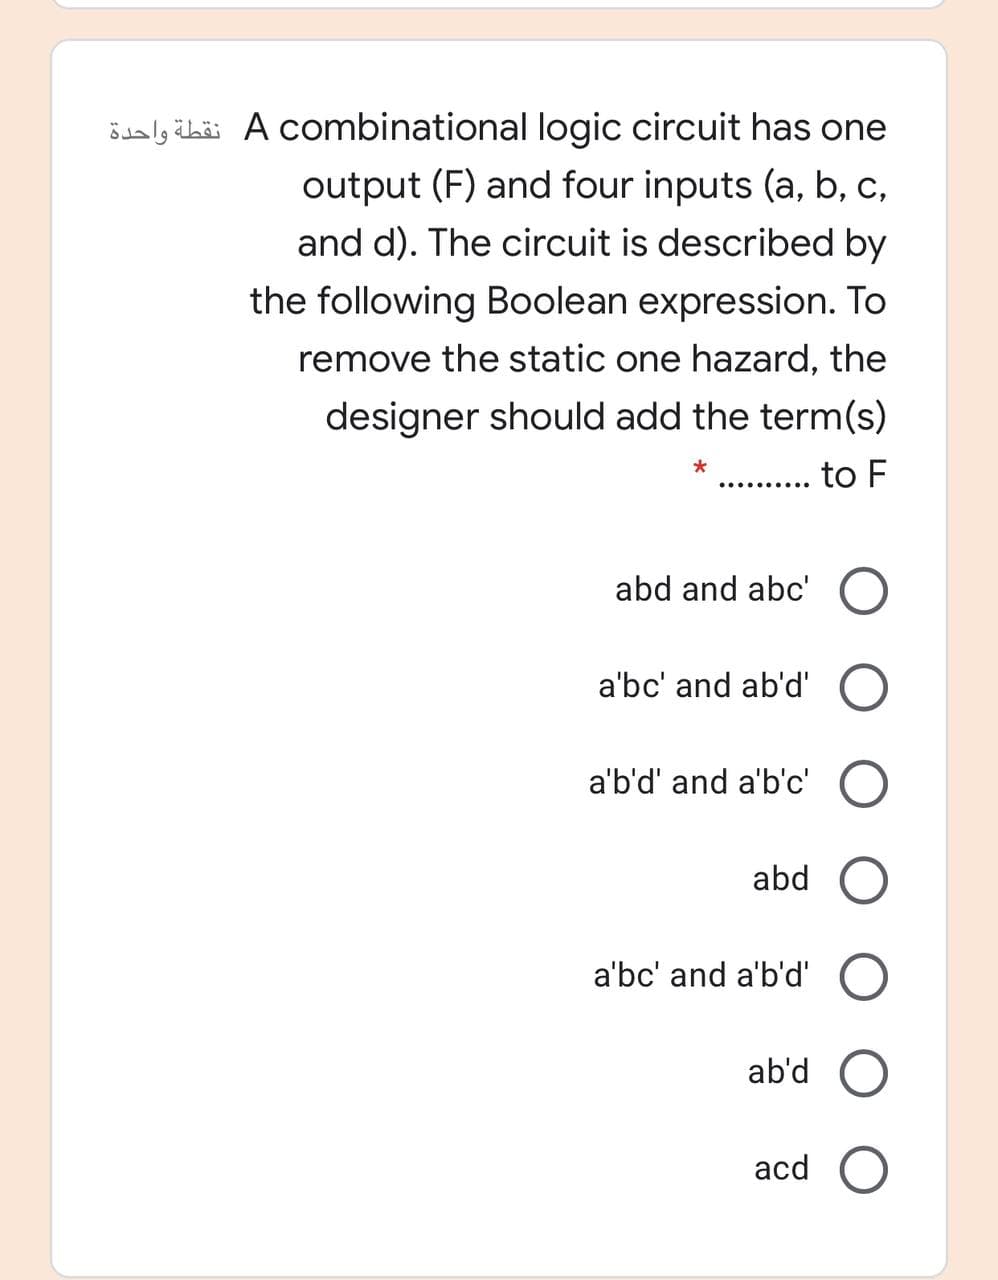 ödaly čbäi A combinational logic circuit has one
output (F) and four inputs (a, b, c,
and d). The circuit is described by
the following Boolean expression. To
remove the static one hazard, the
designer should add the term(s)
to F
..... .....
abd and abc' O
a'bc' and ab'd' O
a'b'd' and a'b'c' O
abd
a'bc' and a'b'd'
ab'd
acd O
